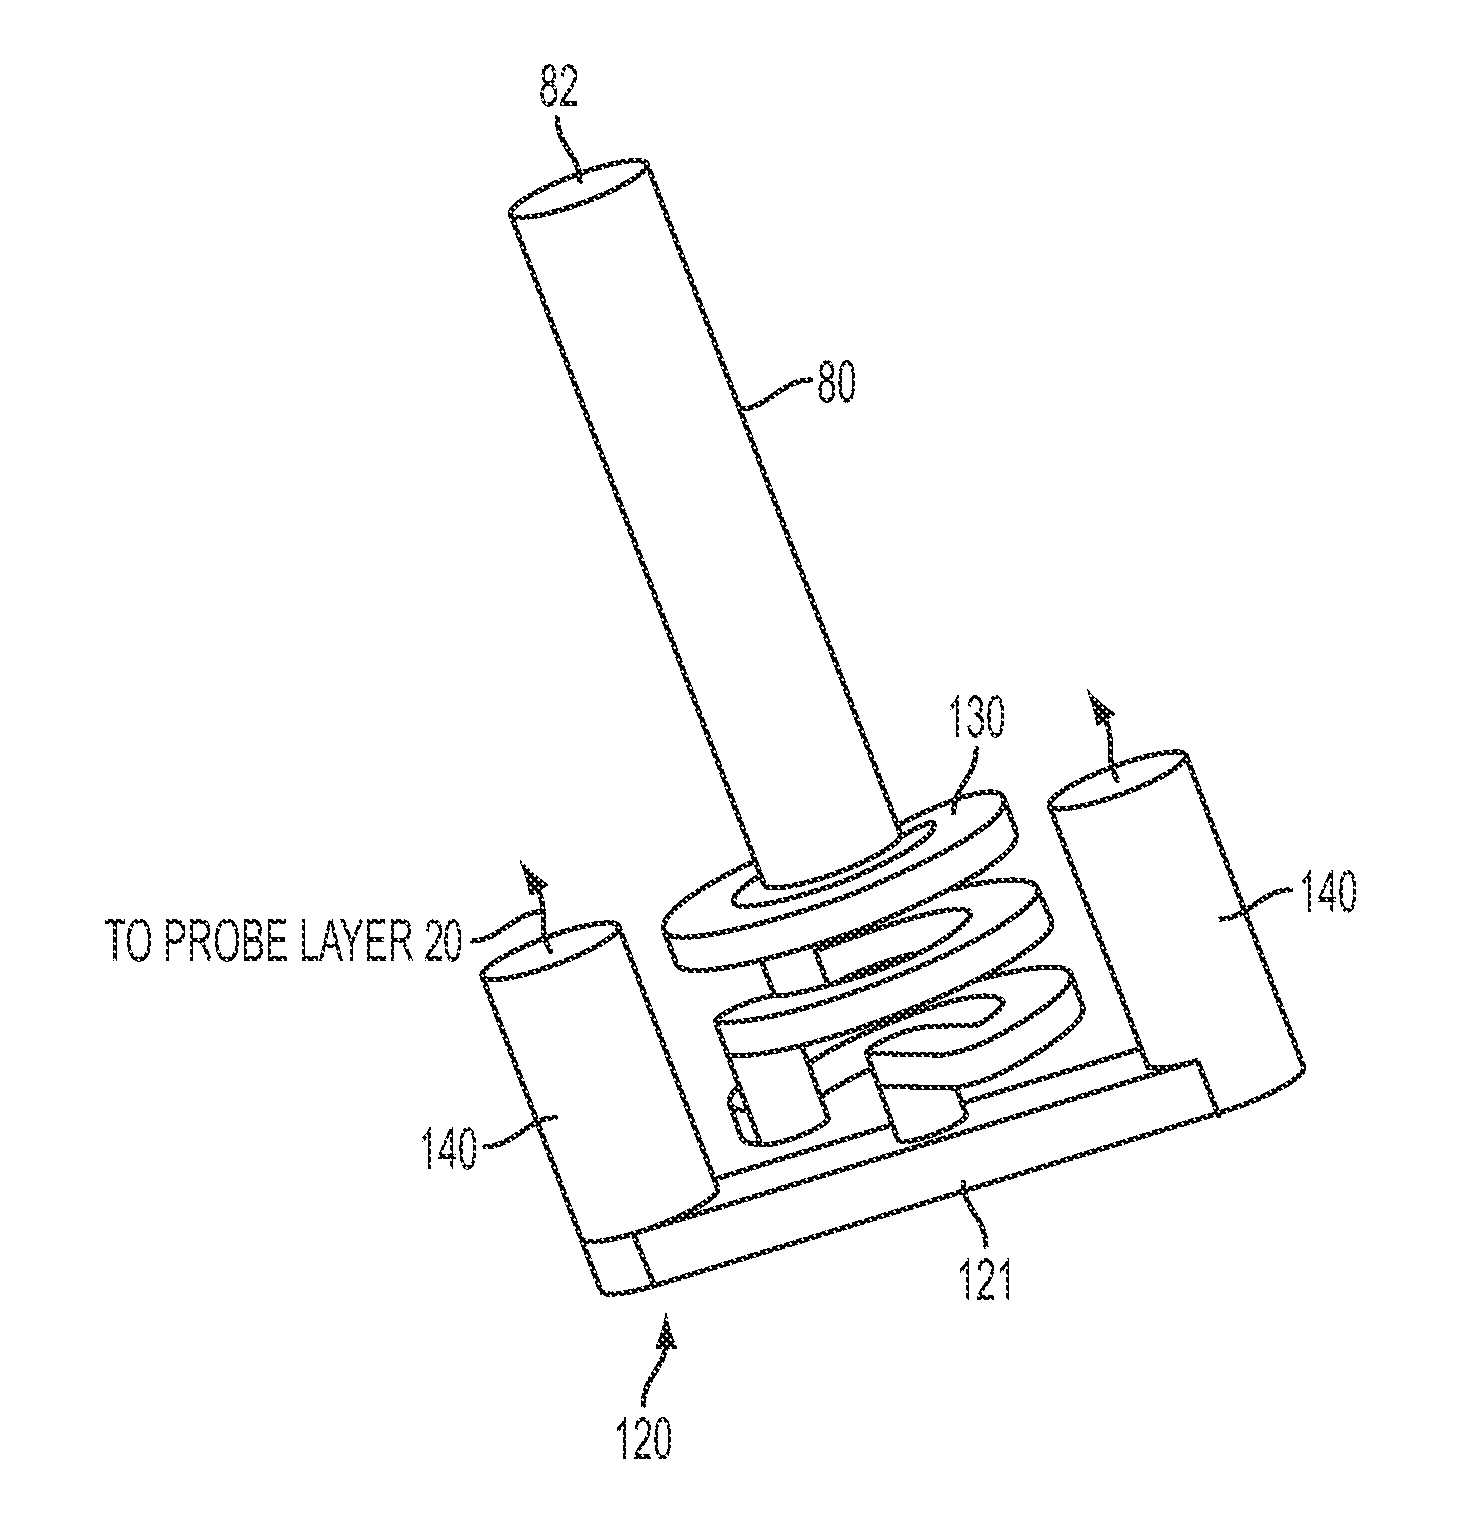 Probe apparatus assembly and method